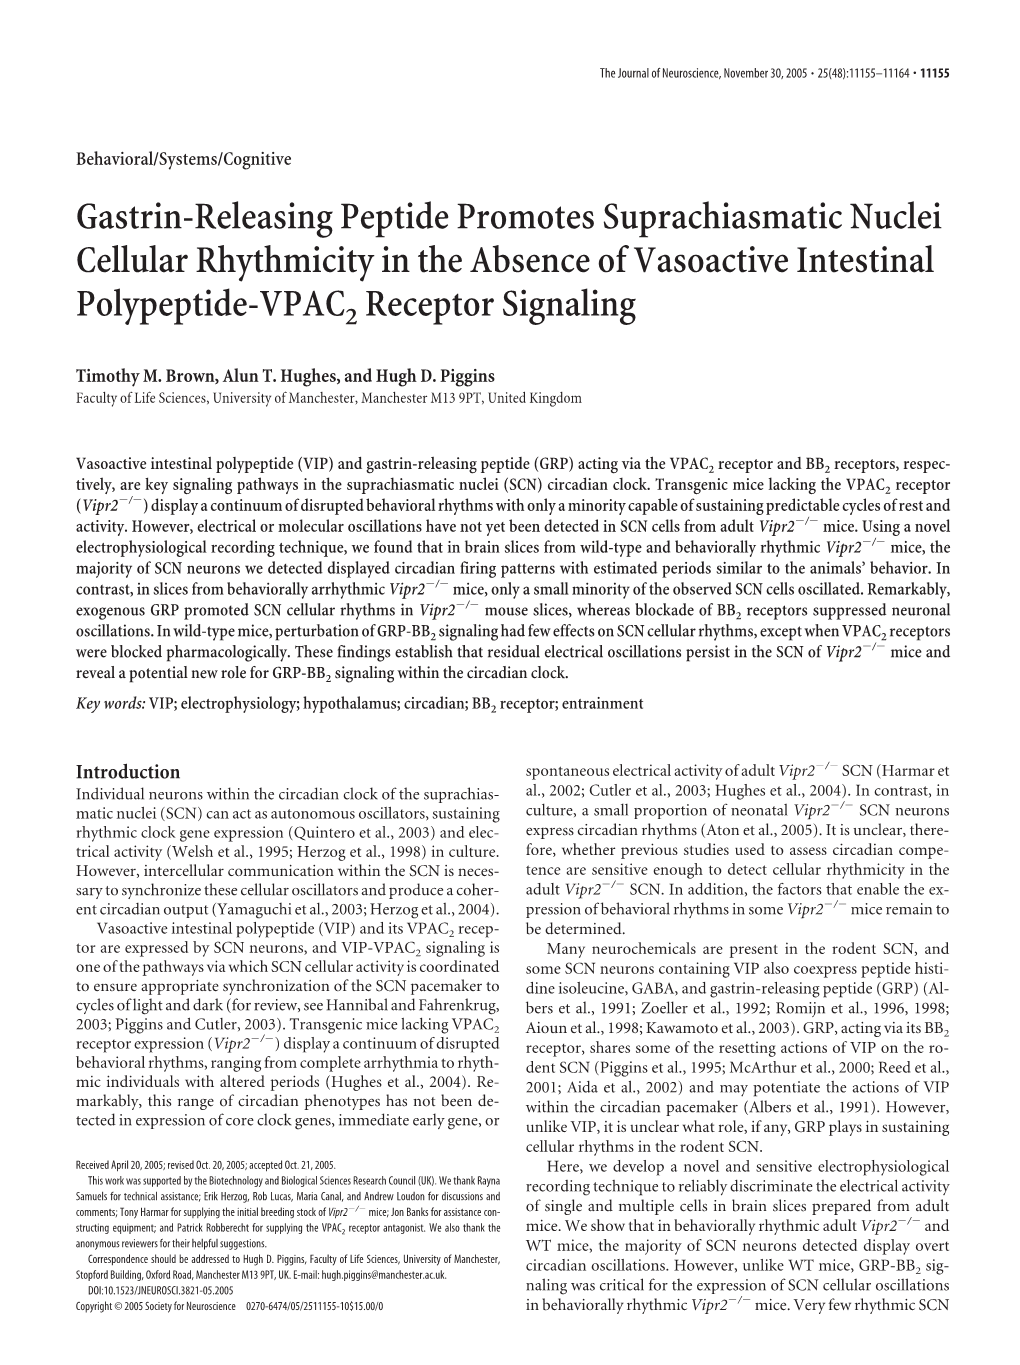 Gastrin-Releasing Peptide Promotes Suprachiasmatic Nuclei Cellular Rhythmicity in the Absence of Vasoactive Intestinal